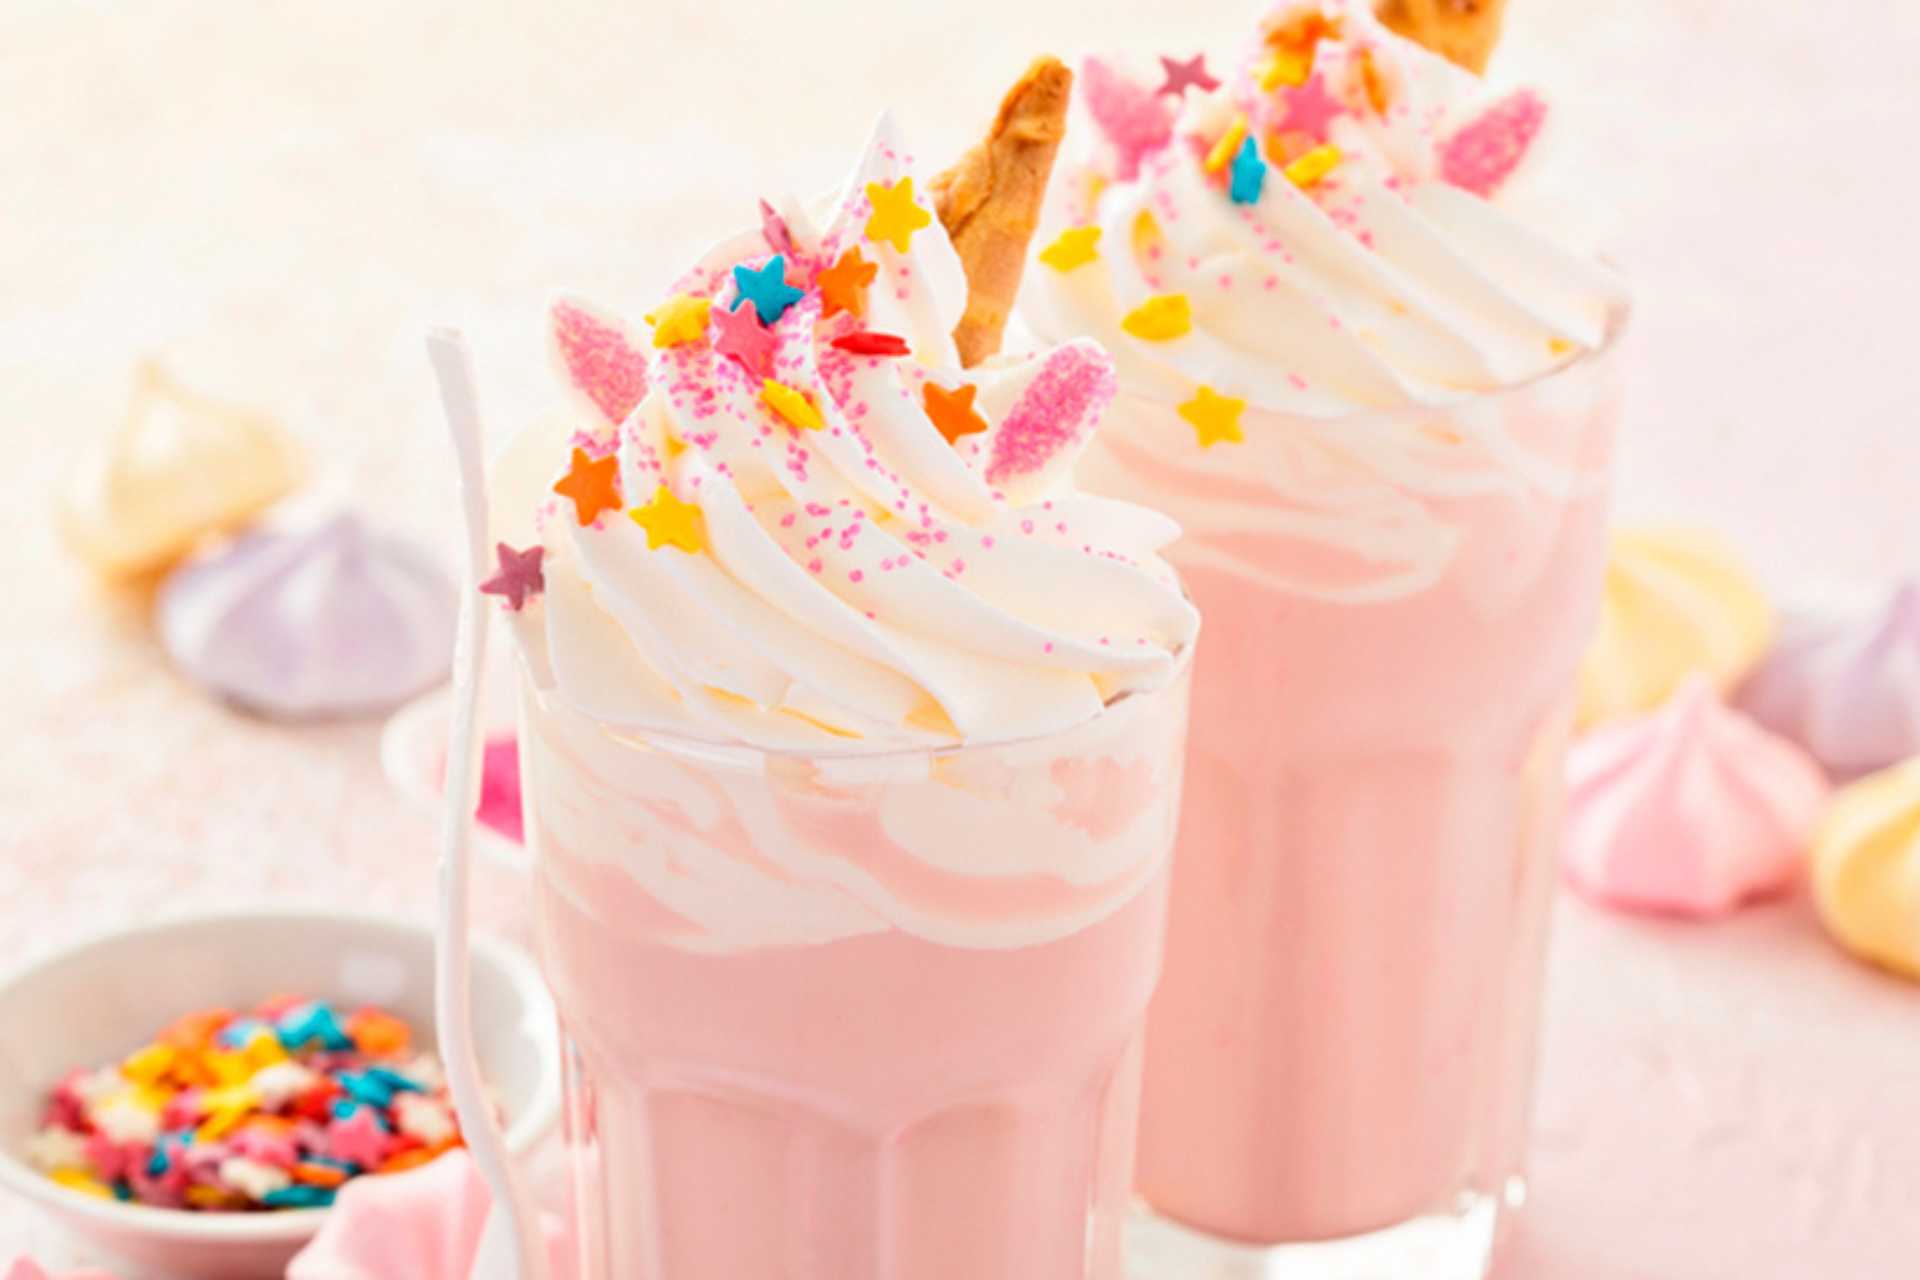 A Guide to Pairing Kids' Fave TV Shows with Food - Milkshake